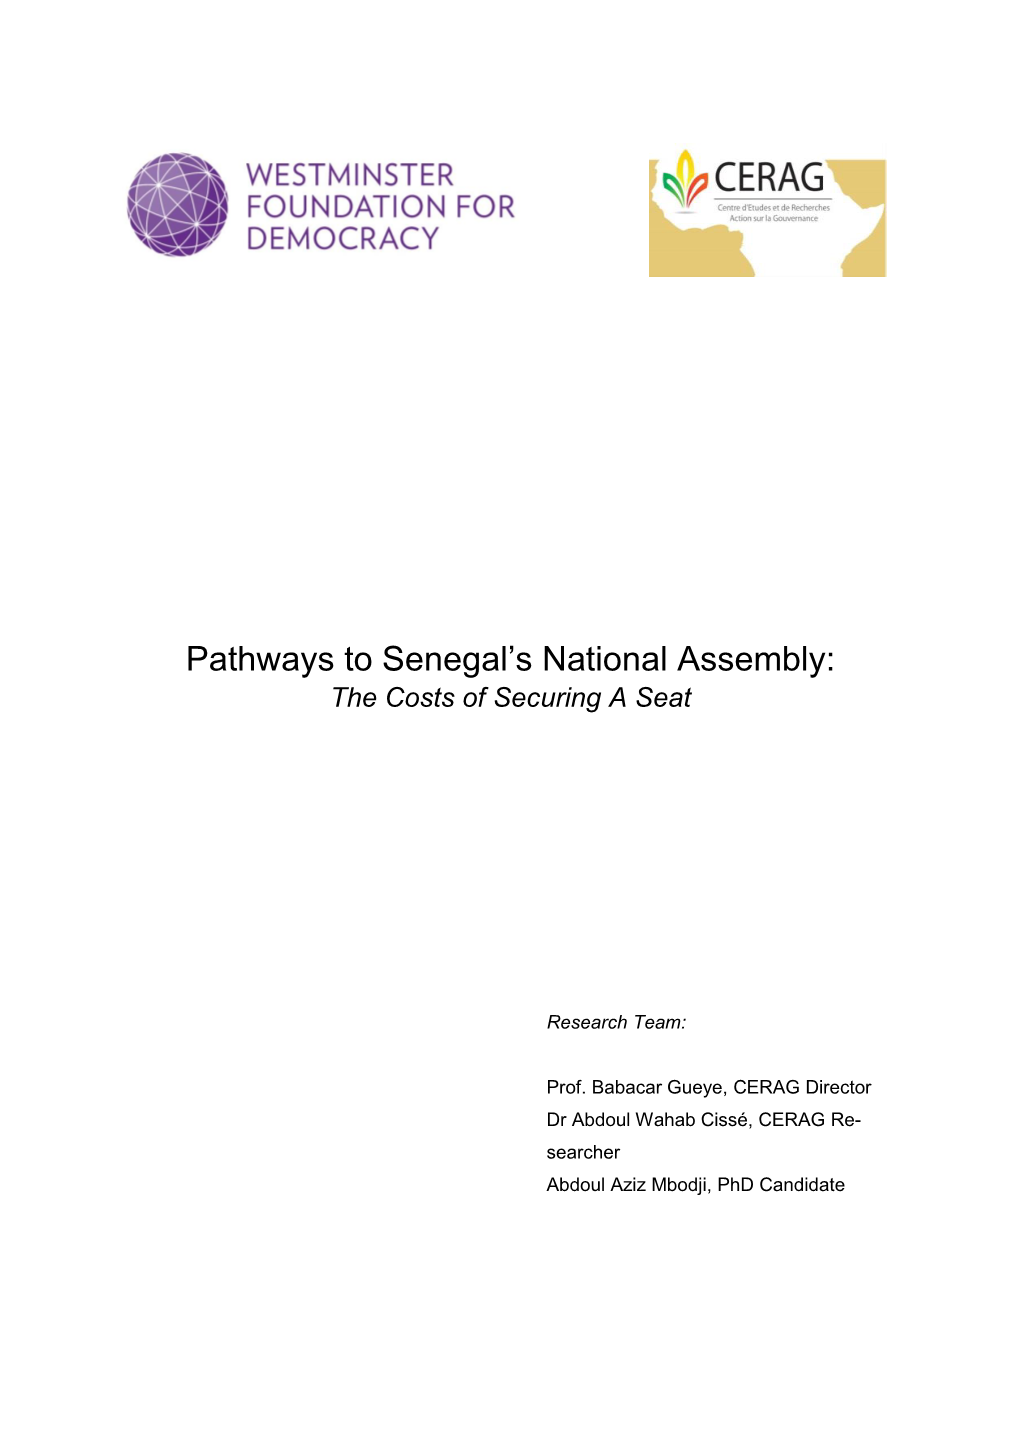 Pathways to Senegal's National Assembly